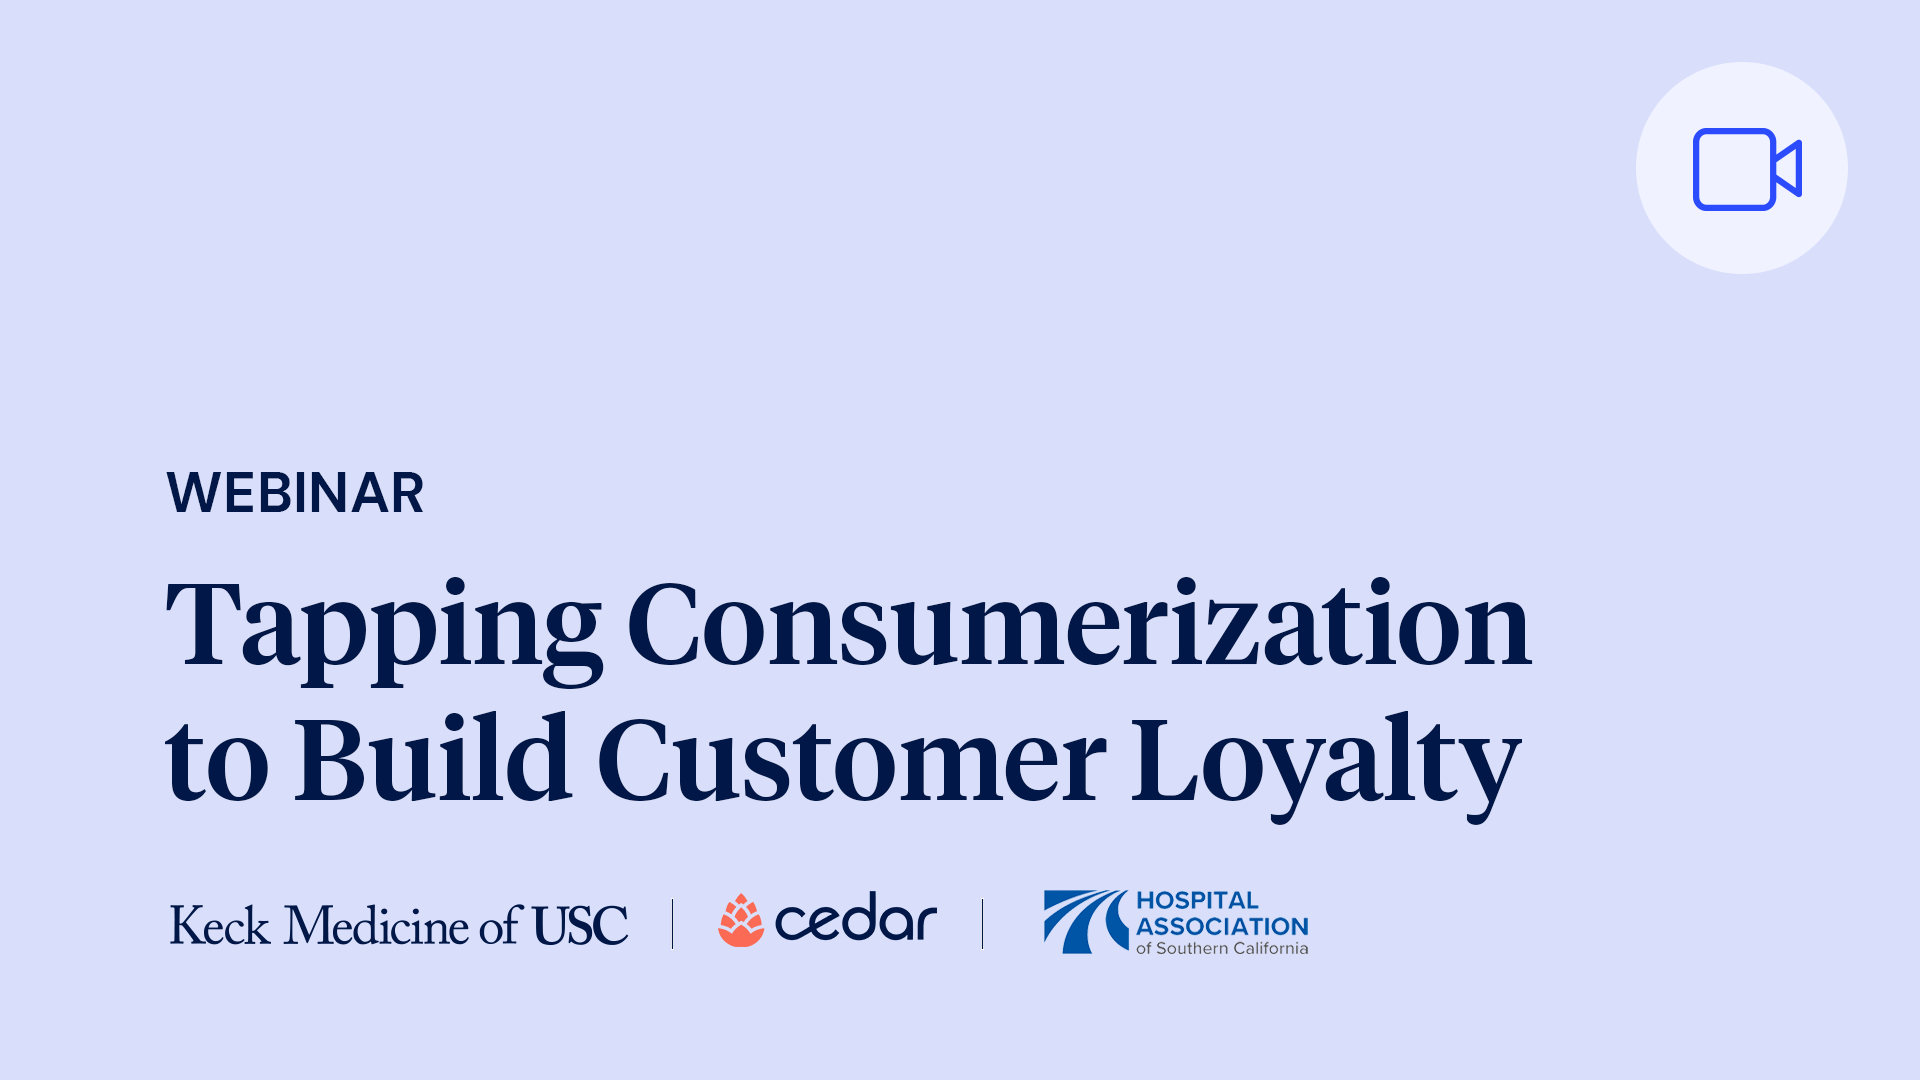 Tapping Consumerization to Build Customer Loyalty